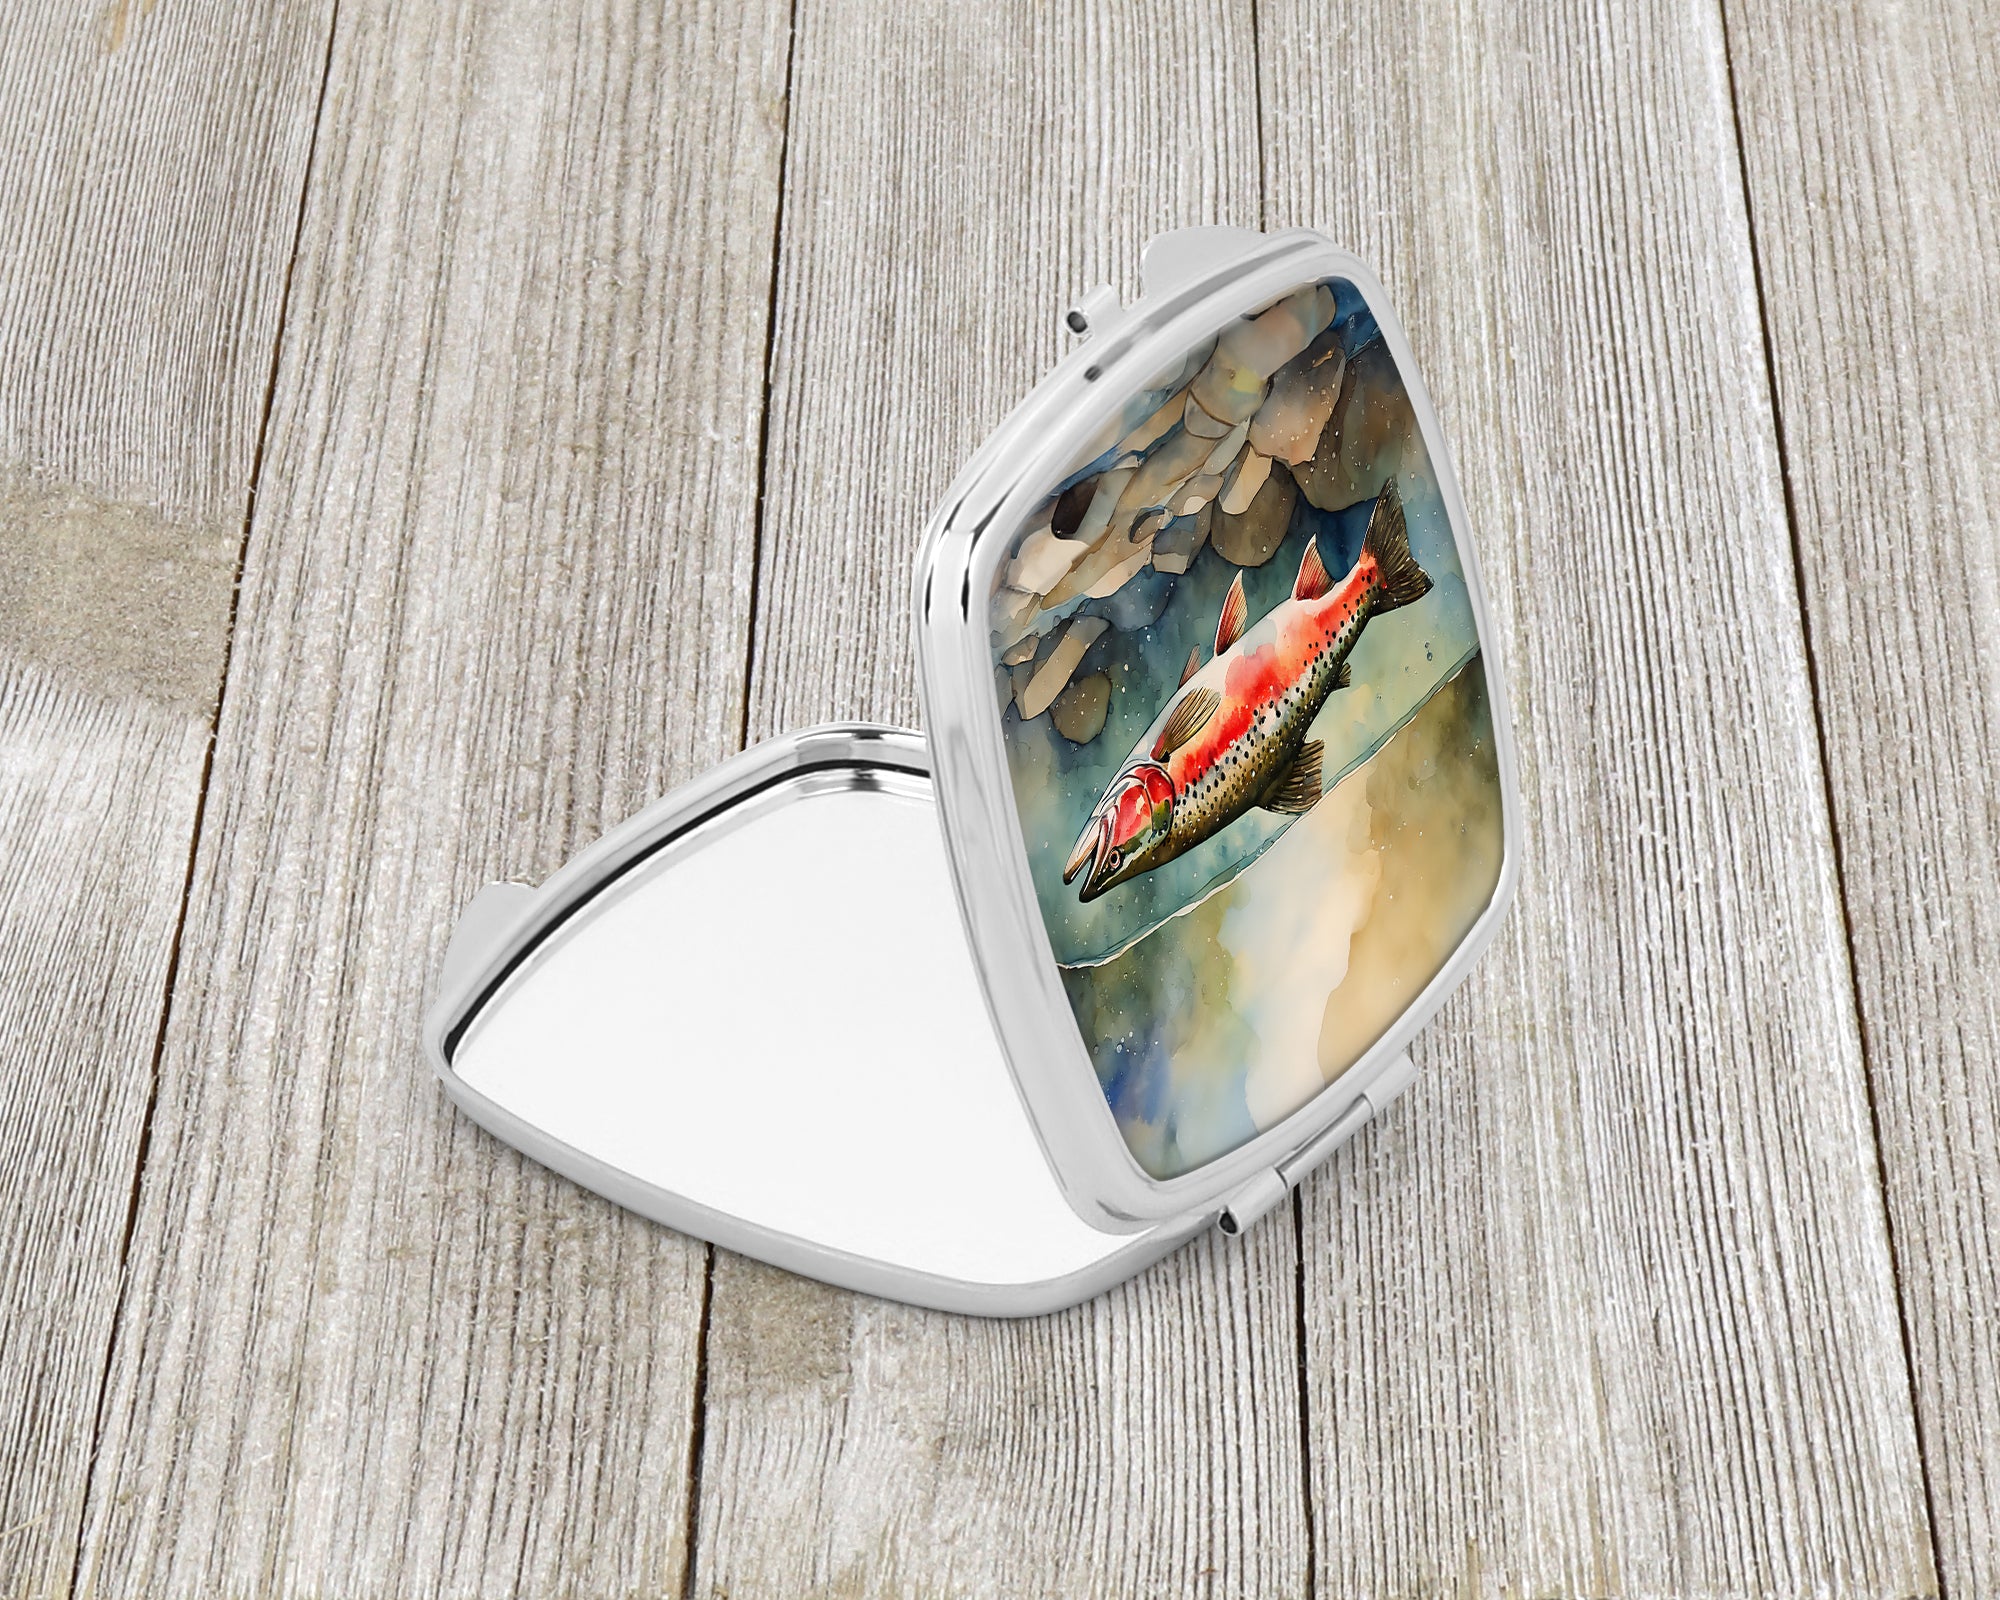 Buy this Trout Compact Mirror